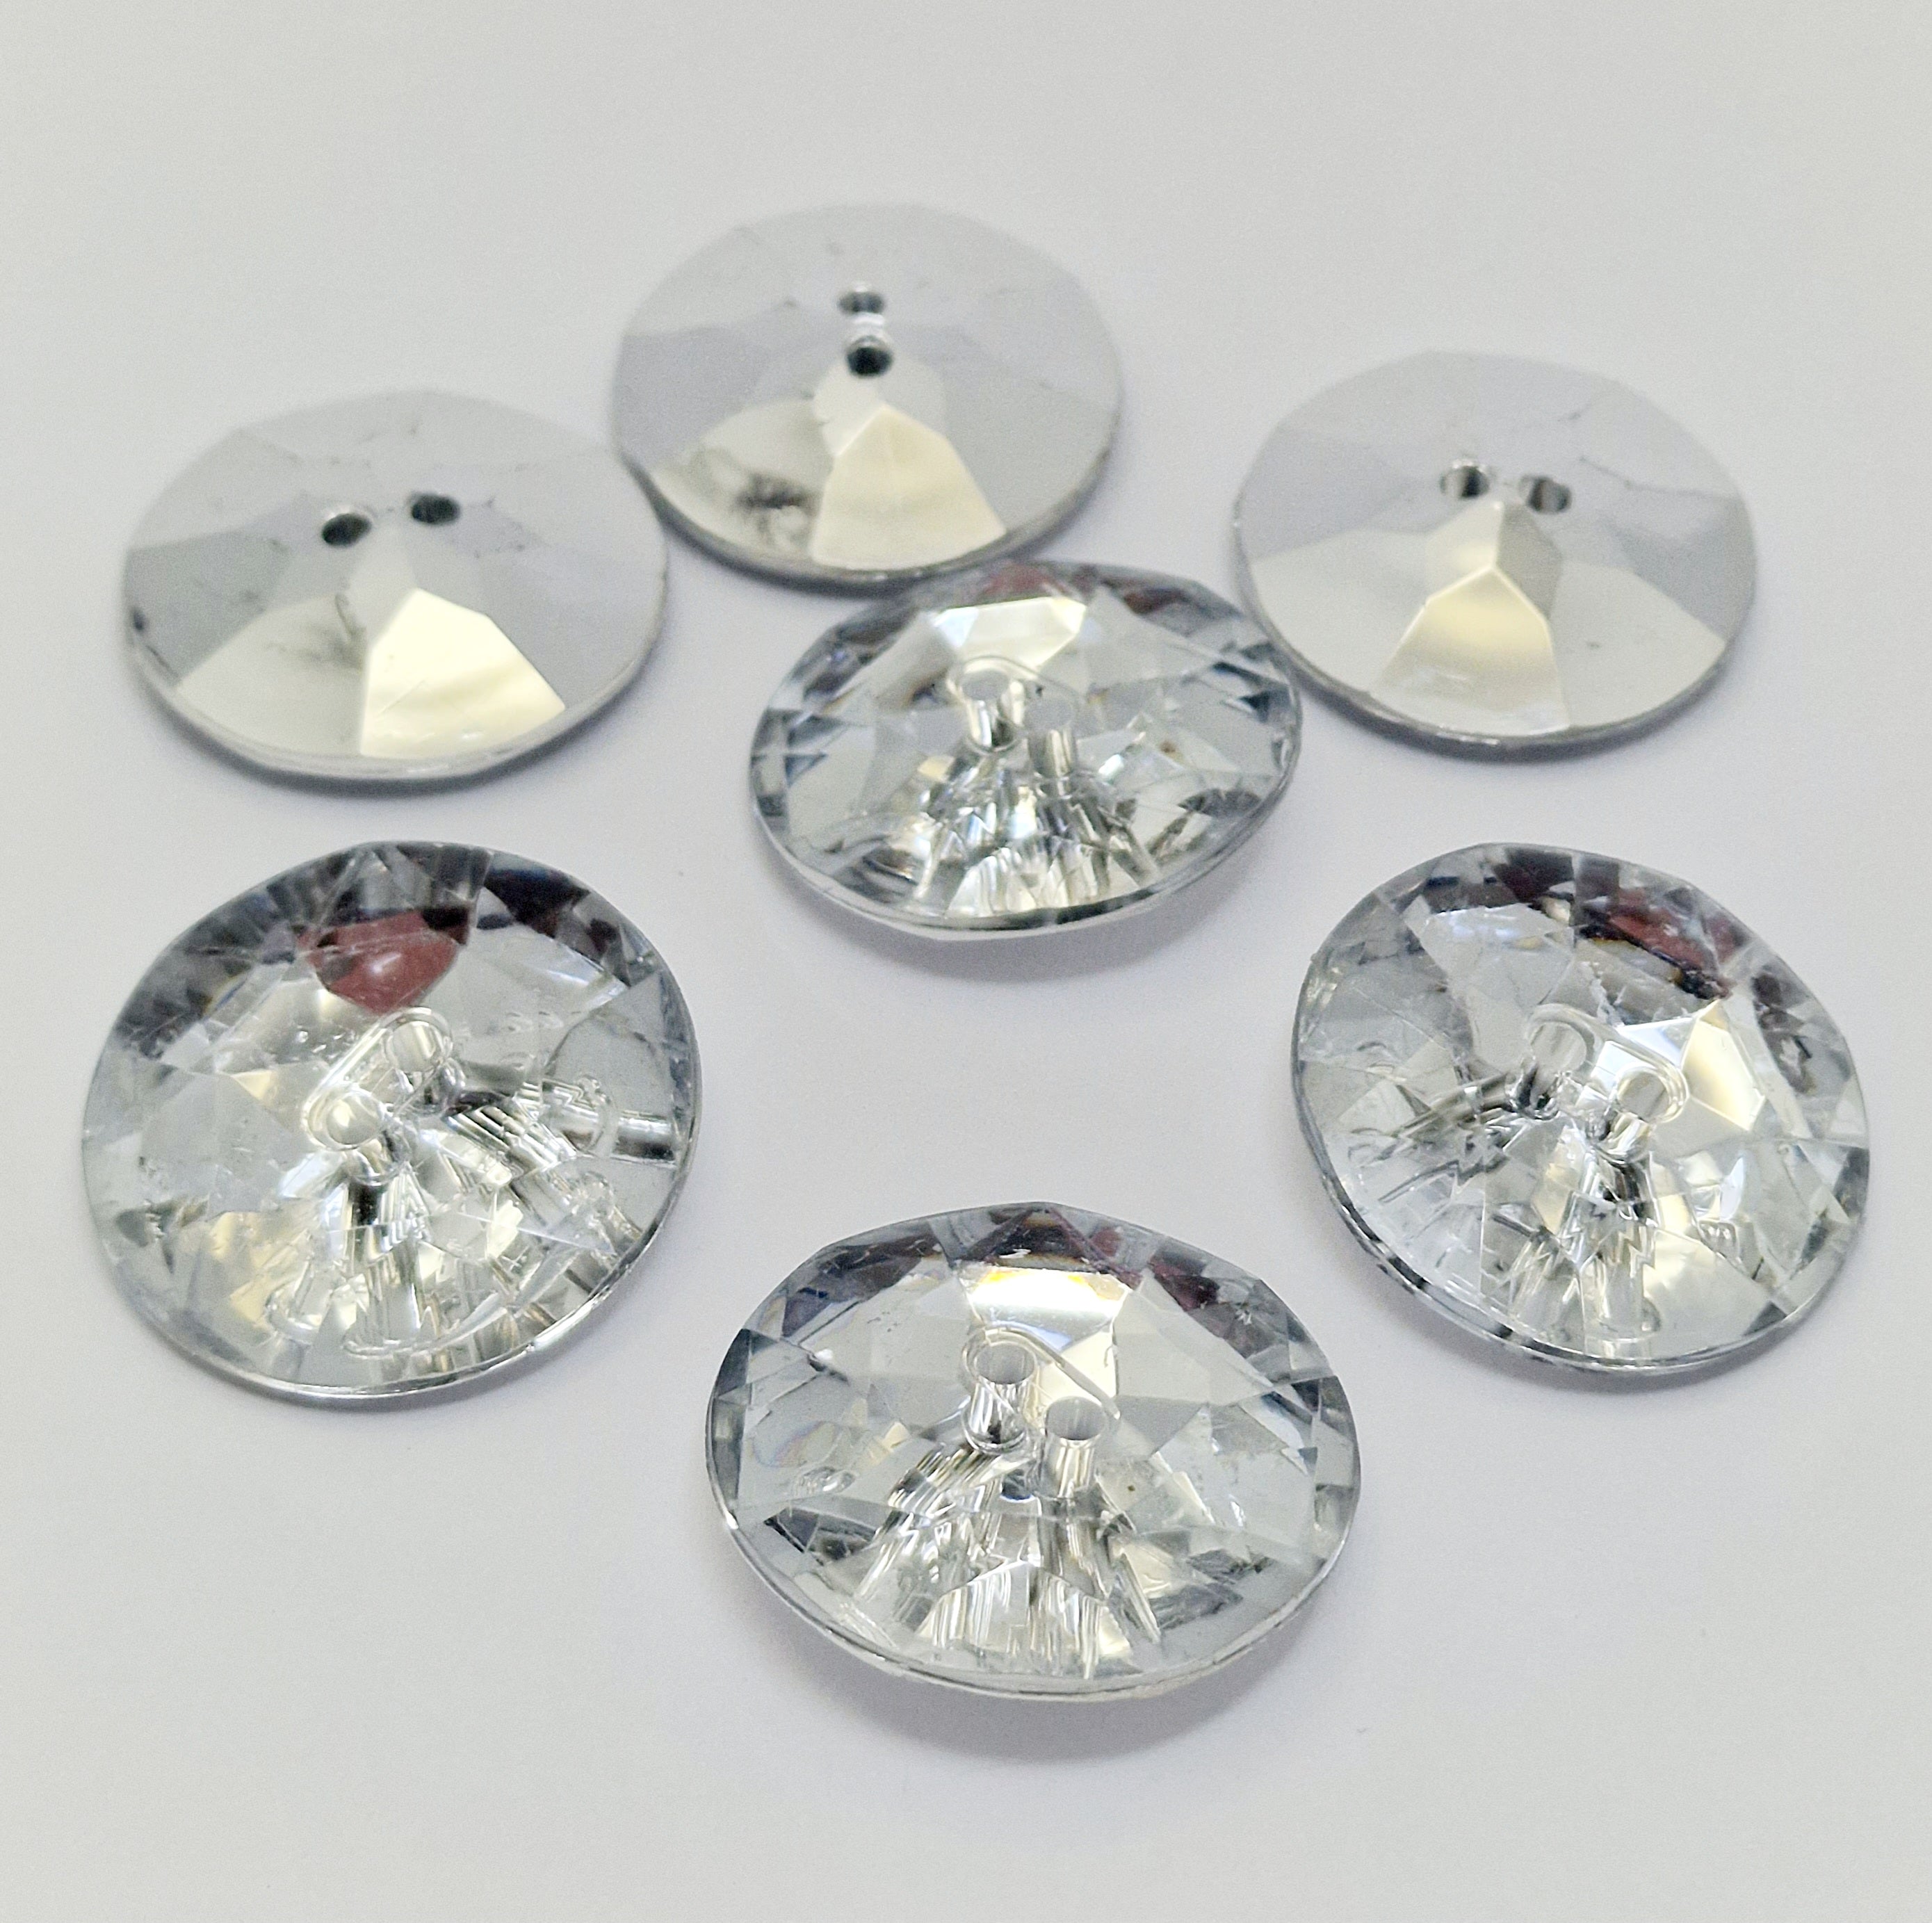 MajorCrafts 2pcs 30mm Crystal Clear 2 Holes Acrylic Large Round Sewing Buttons